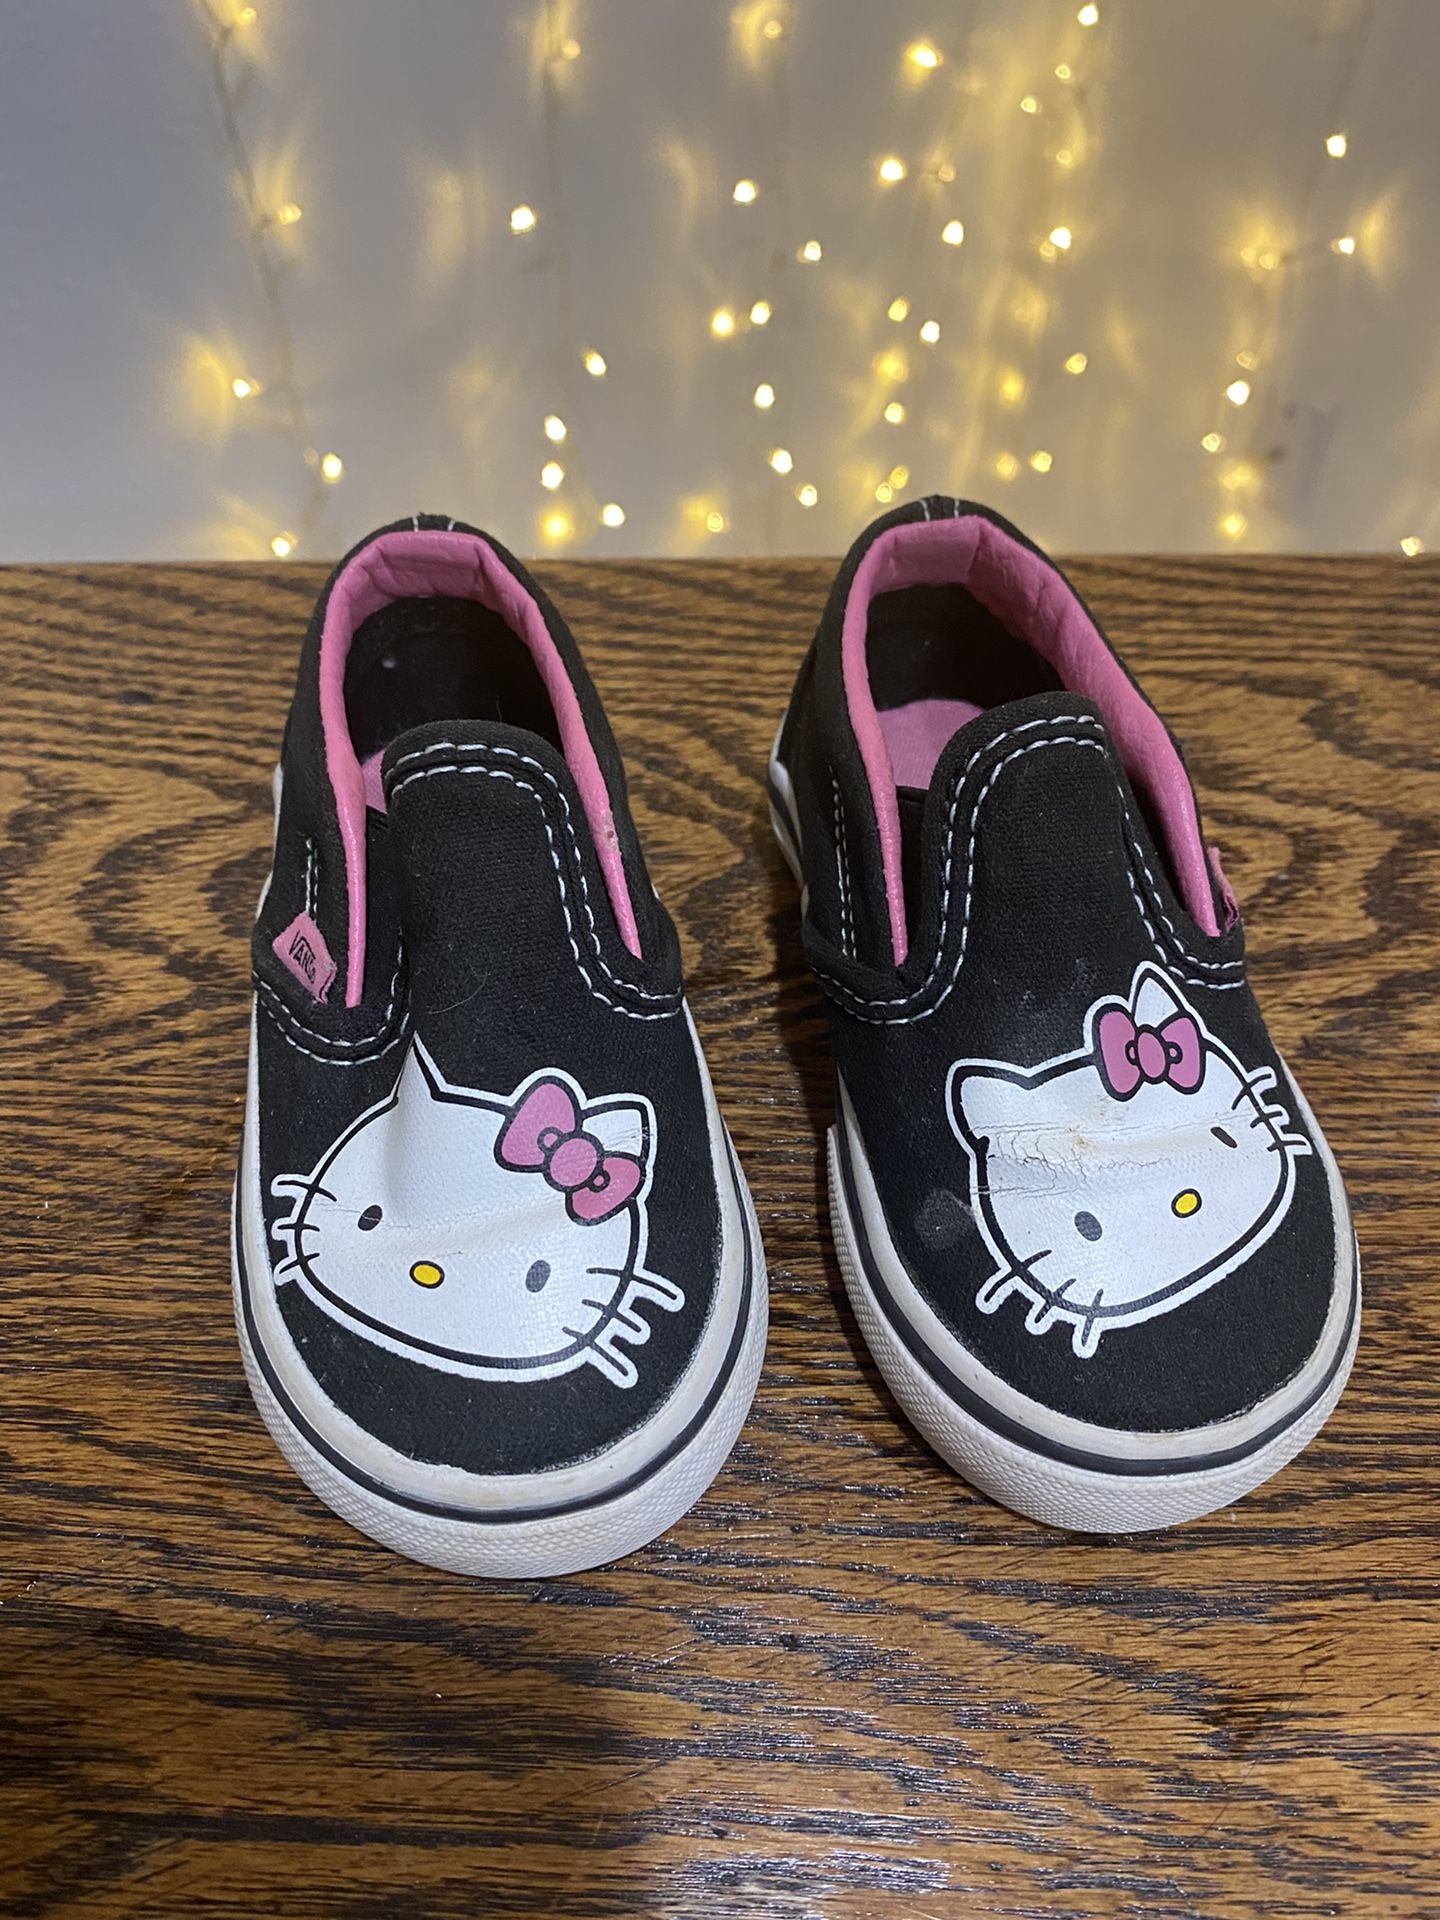 Hello Kitty Toddler Slip On Shoes Vans Hot Pink And Black